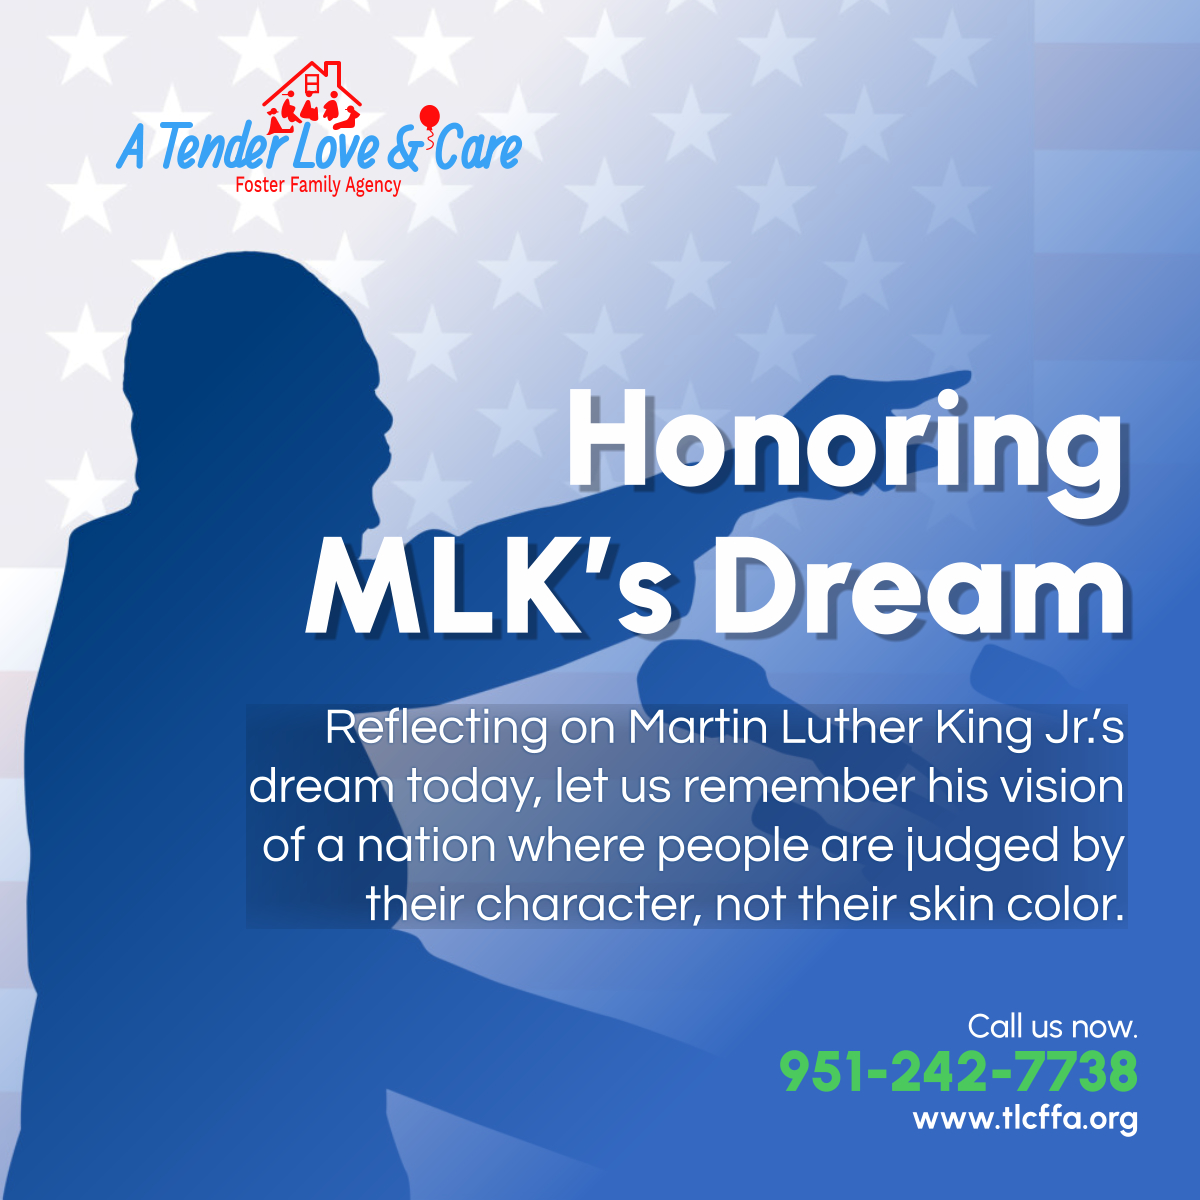 MLK’s dream is a call to action. Today and every day, let’s actively contribute to breaking down barriers and building bridges towards a more inclusive society.

#MLKDay #FosterCare #MorenoValleyCA #MLKsDream #HonoringMLK